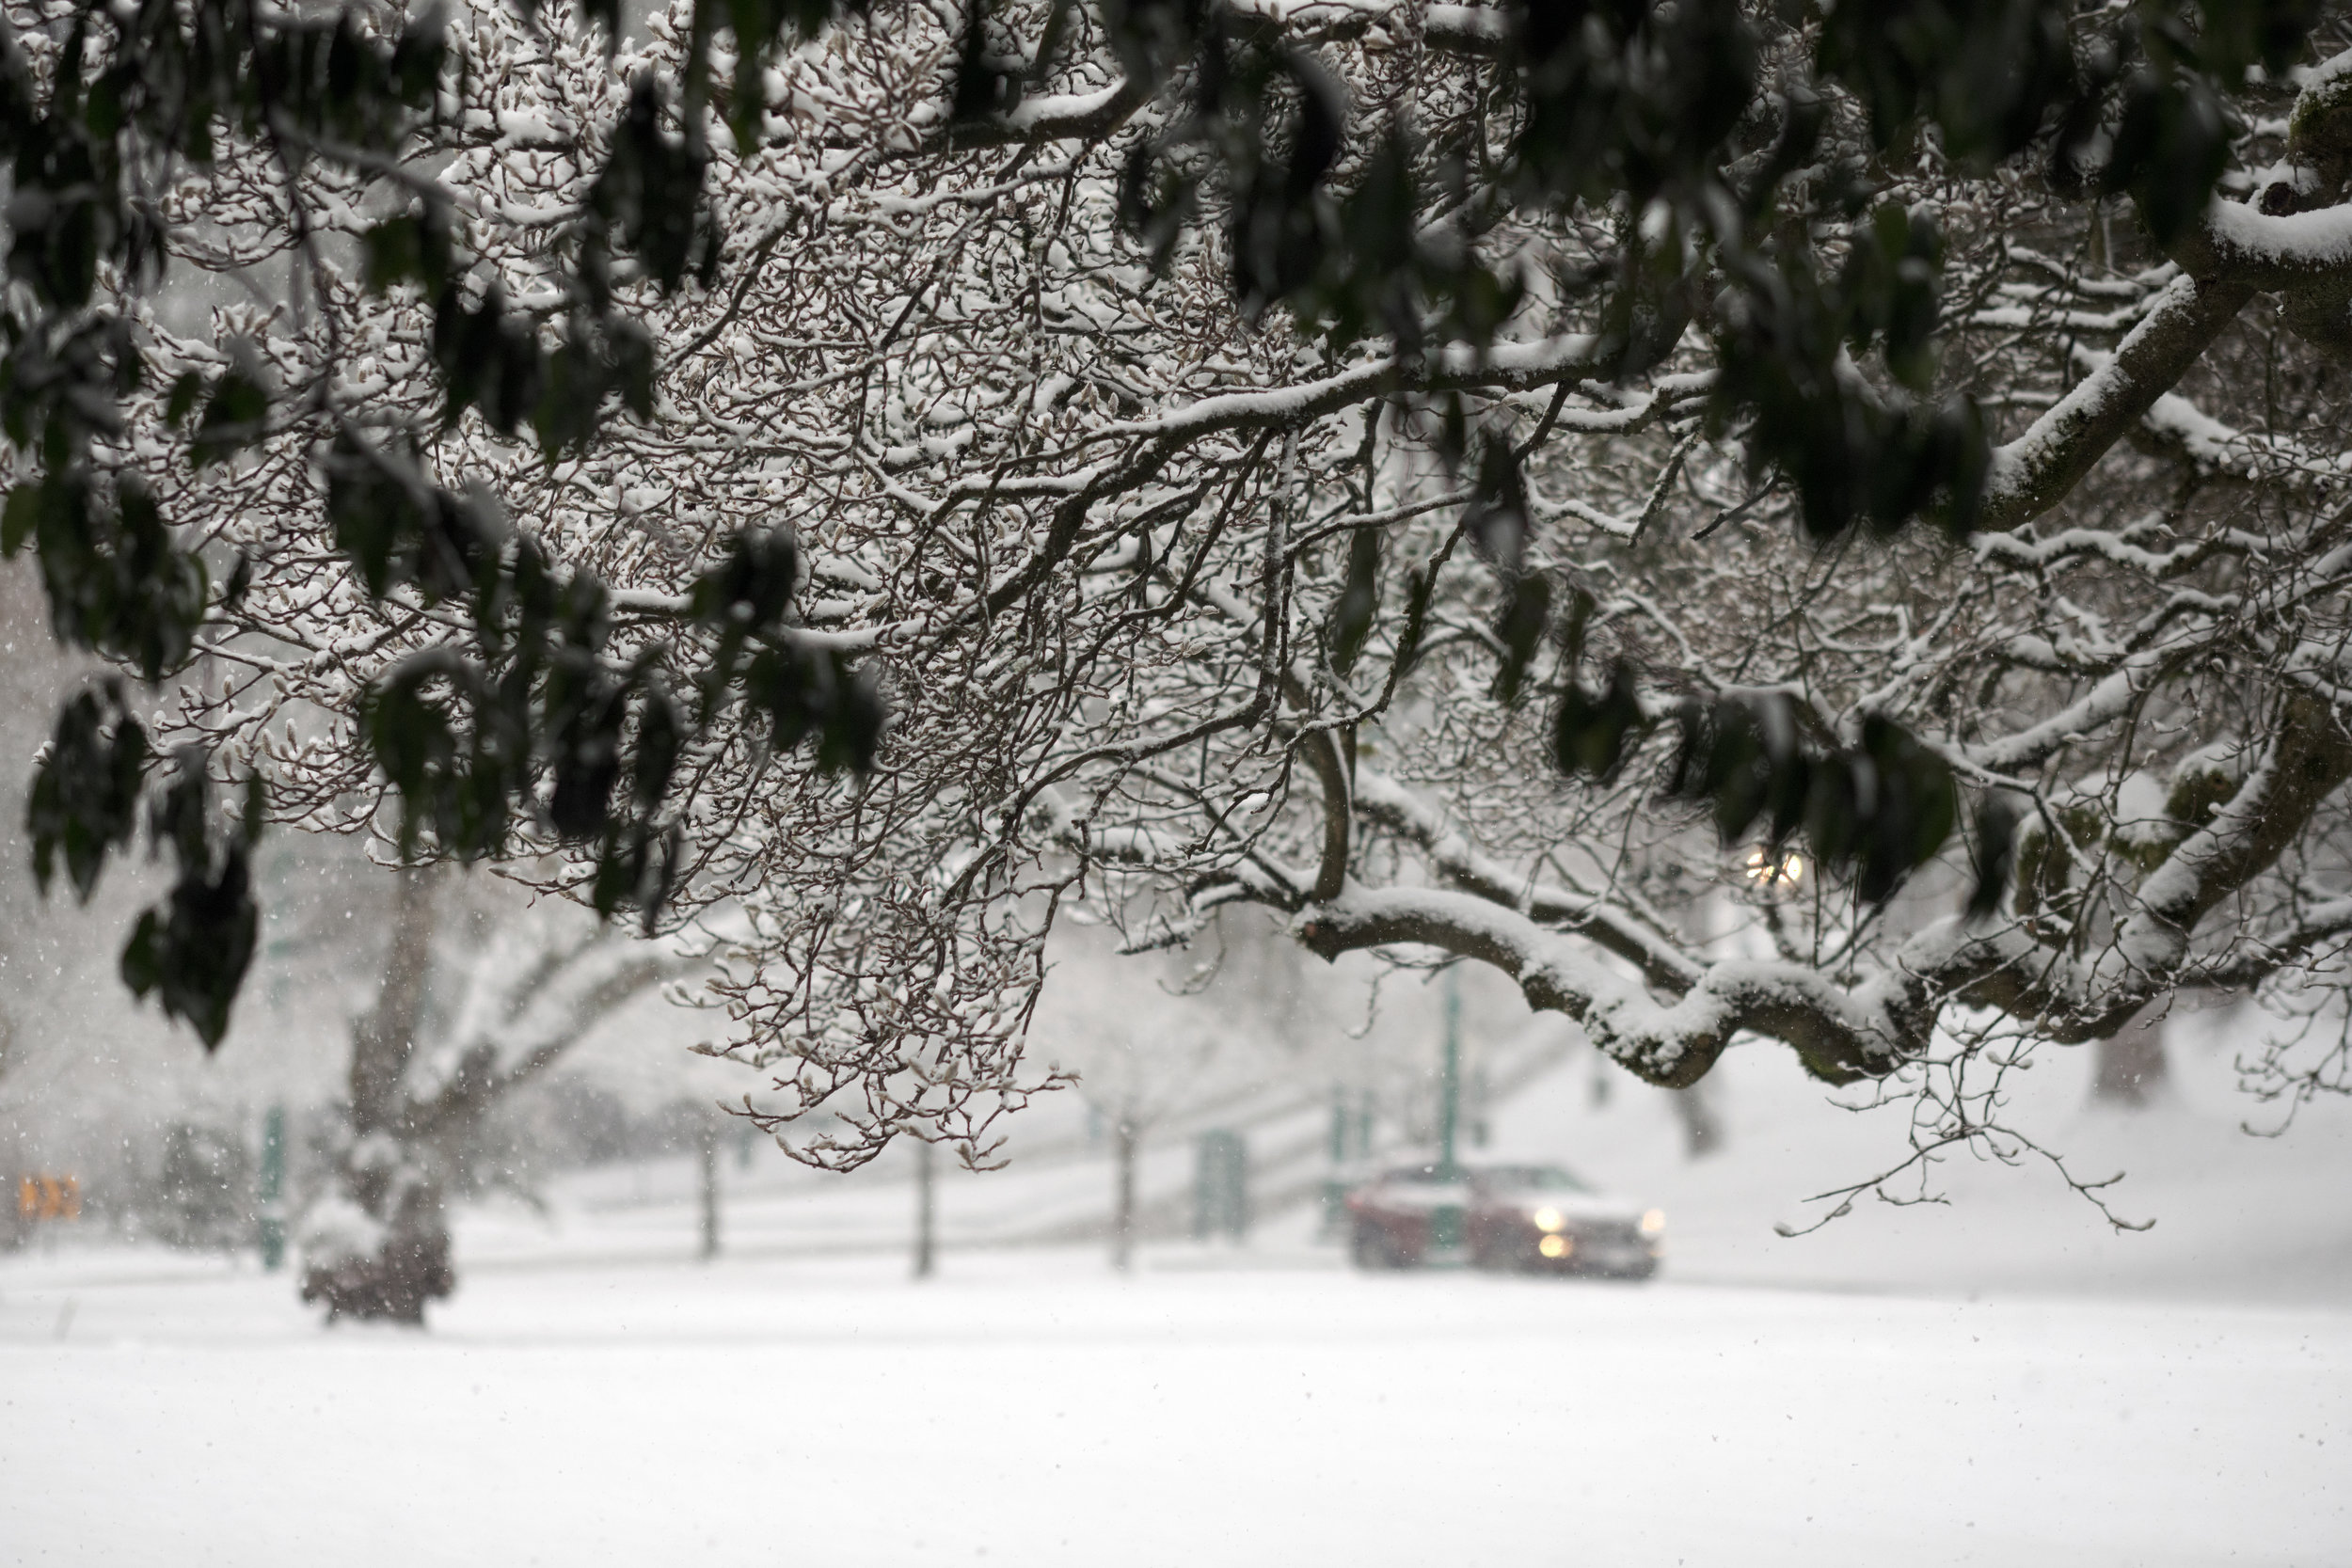 A snow storm hits Stanley Park in Vancouver. A car enters the park by Coal Harbour